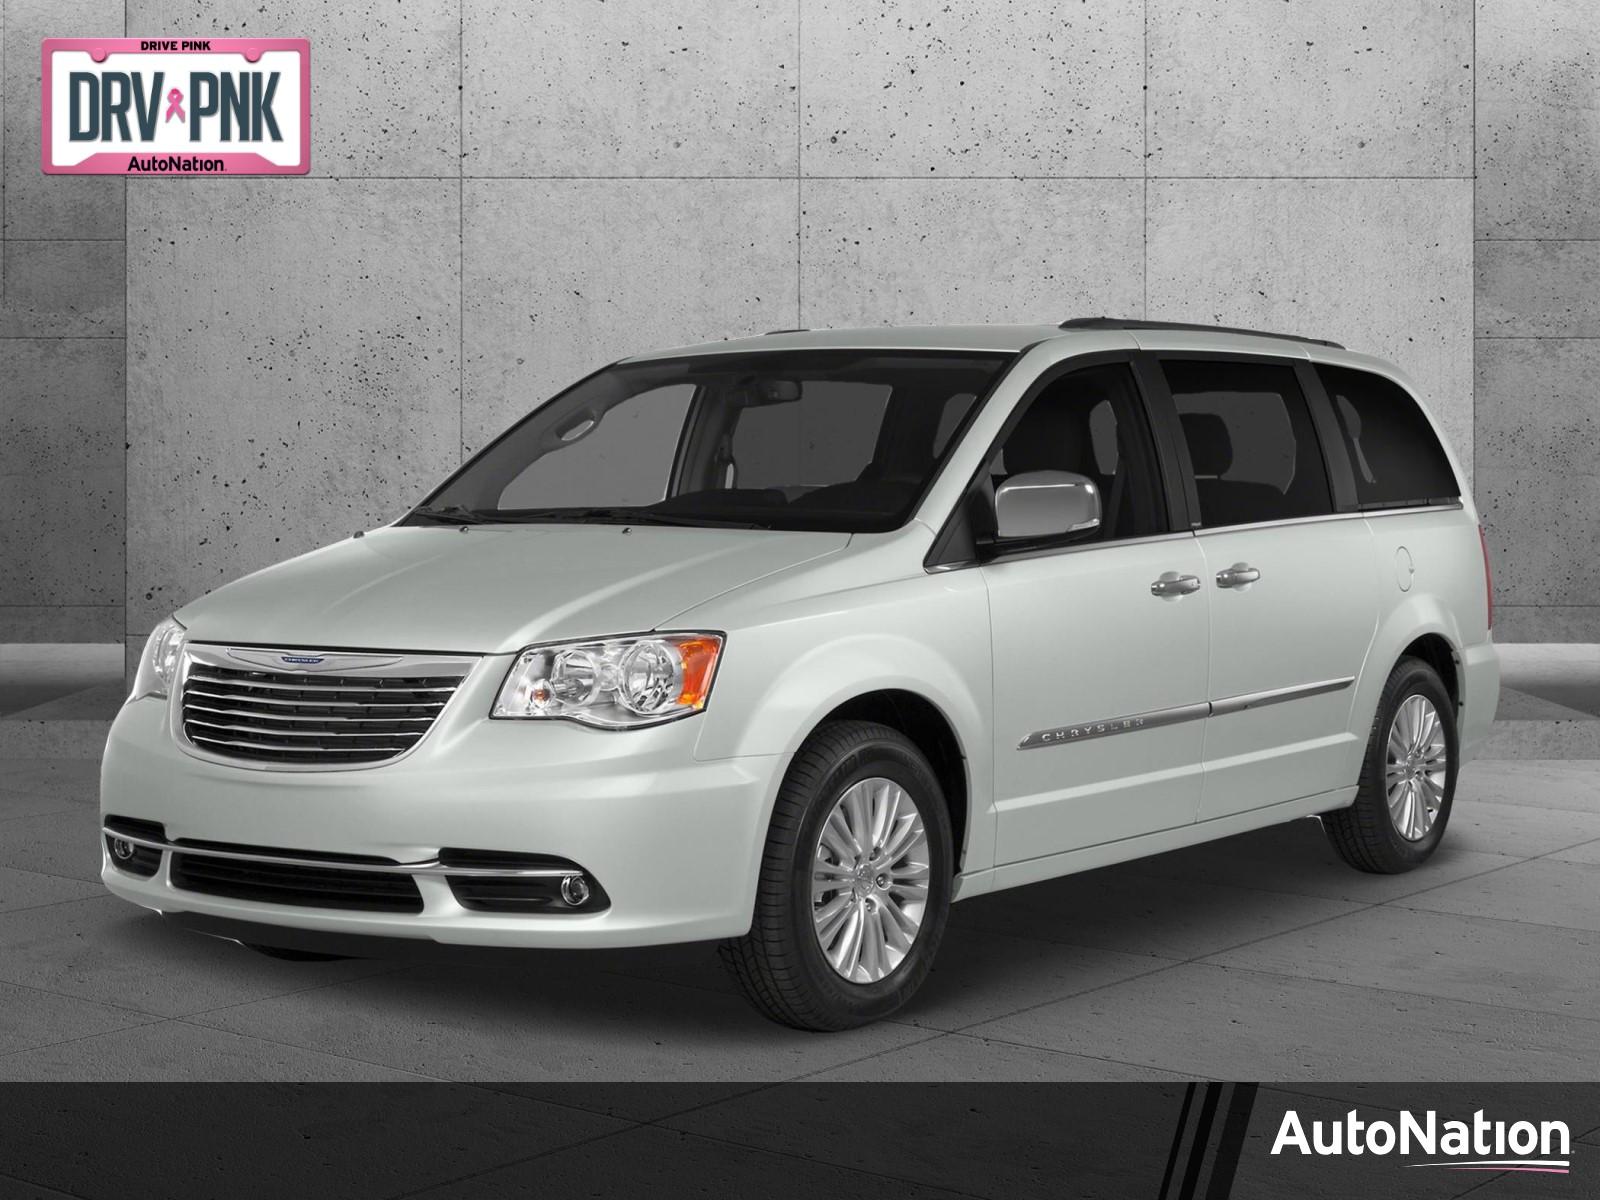 2015 Chrysler Town & Country Vehicle Photo in Pembroke Pines, FL 33027